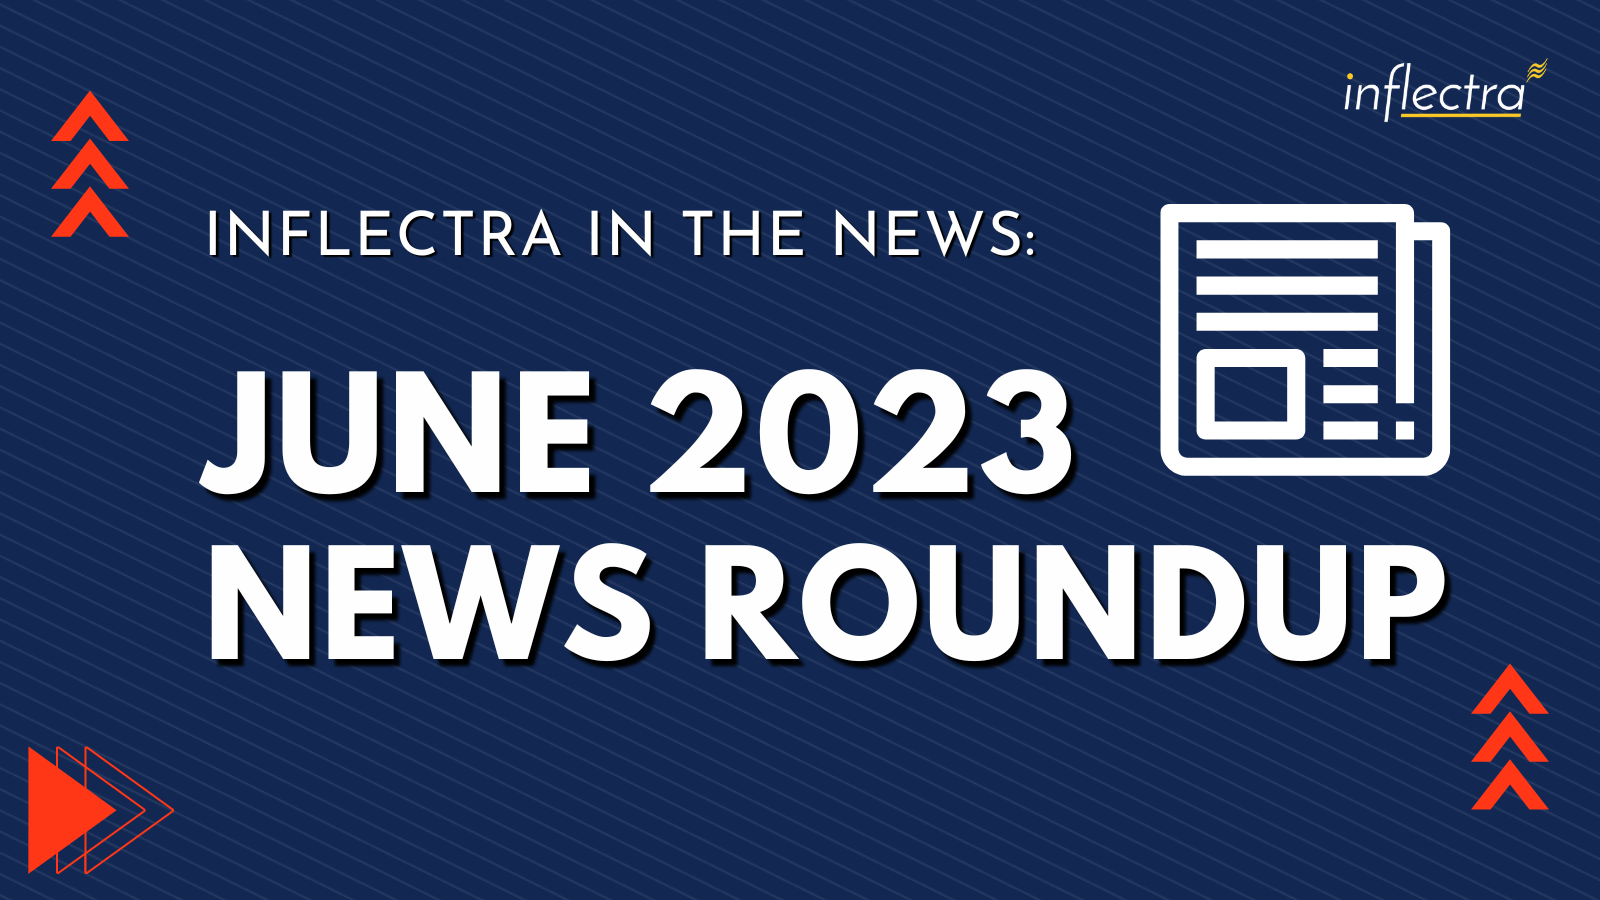 inflectra-in-the-news-june-roundup-image